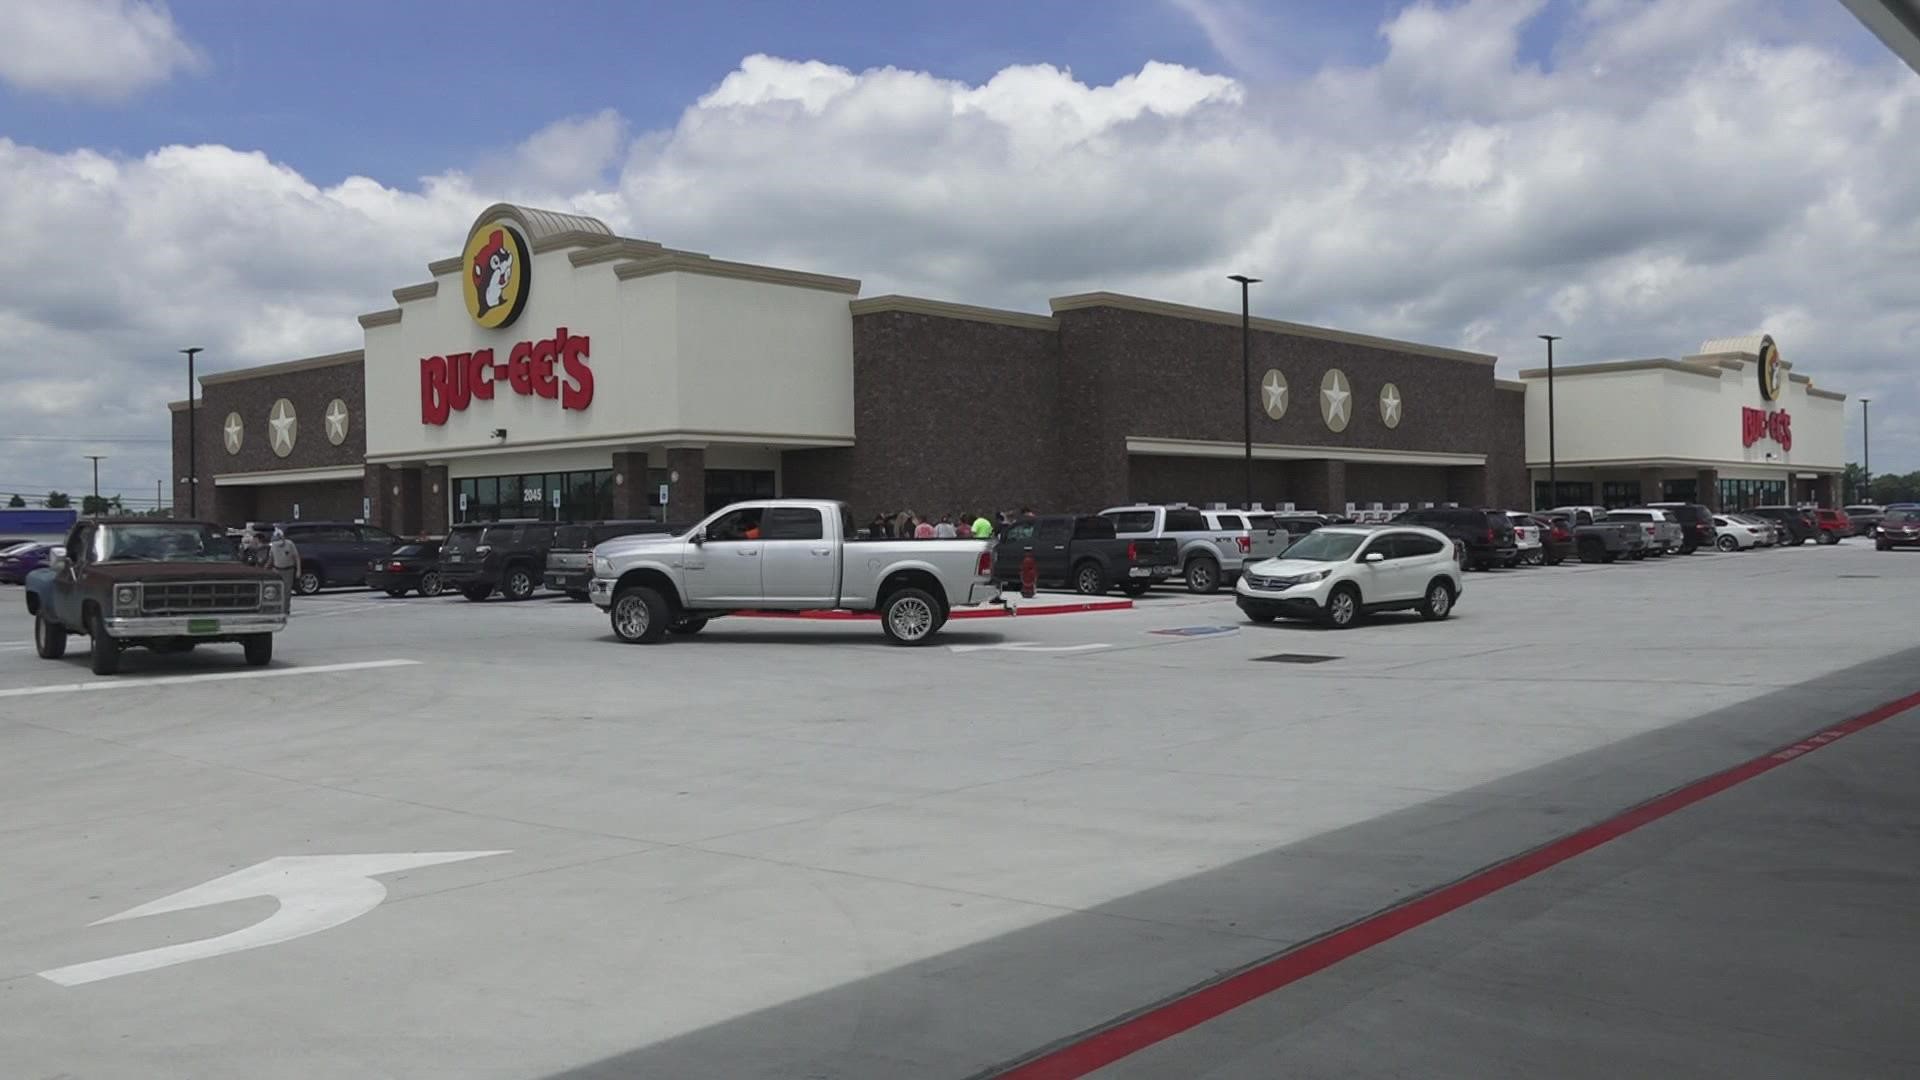 Hundreds of people came from across the state for the grand opening of Buc-ee's 50th location.